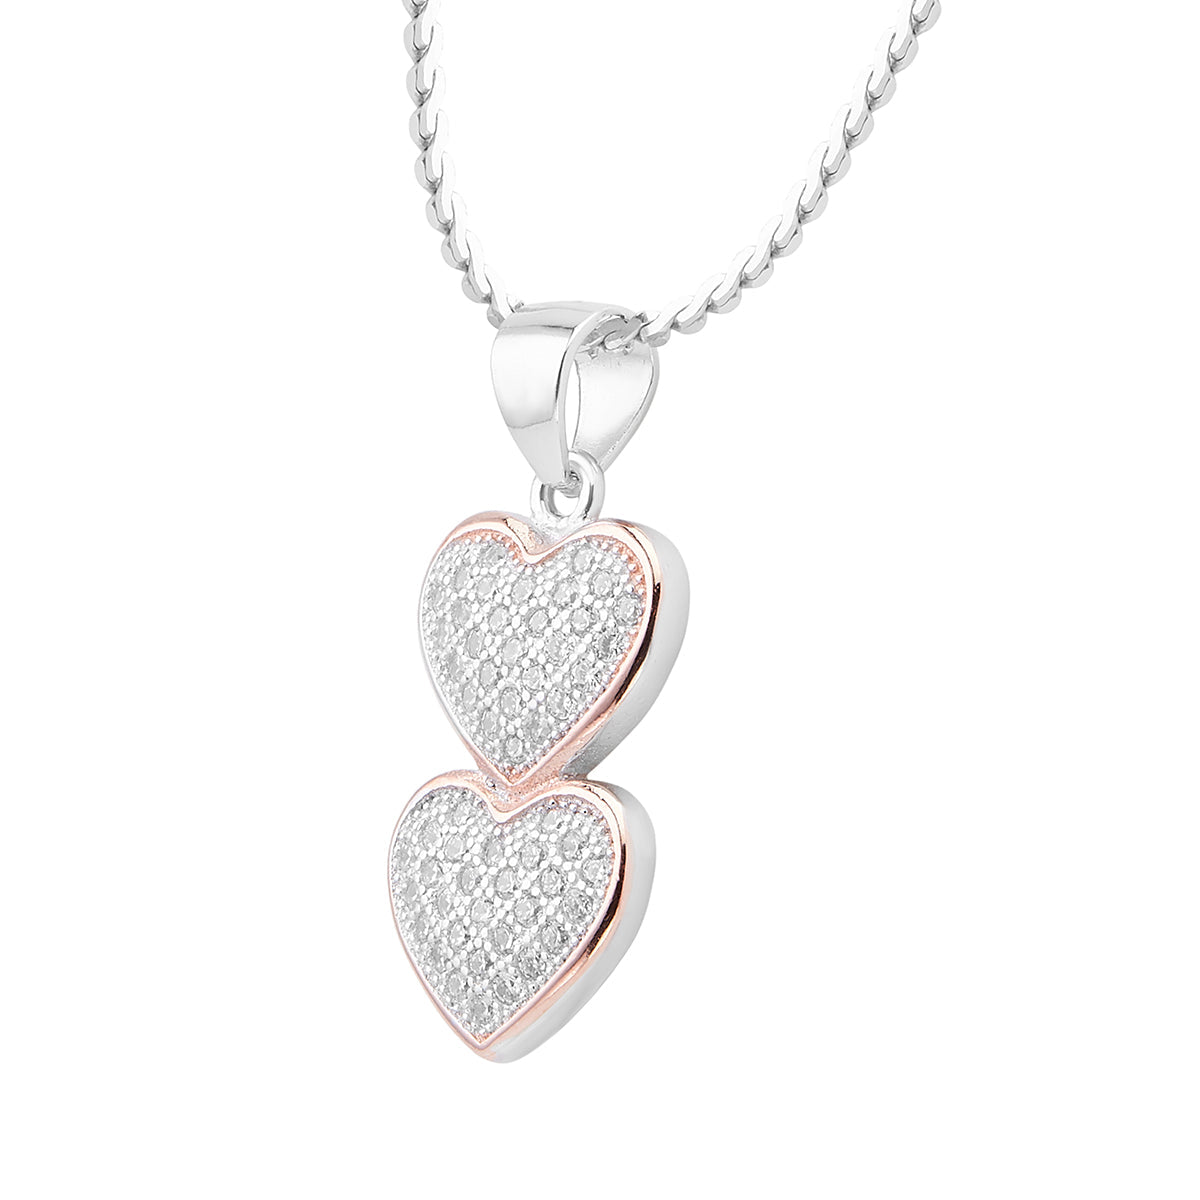 Charming Double Heart Pendant Set with Link Chain